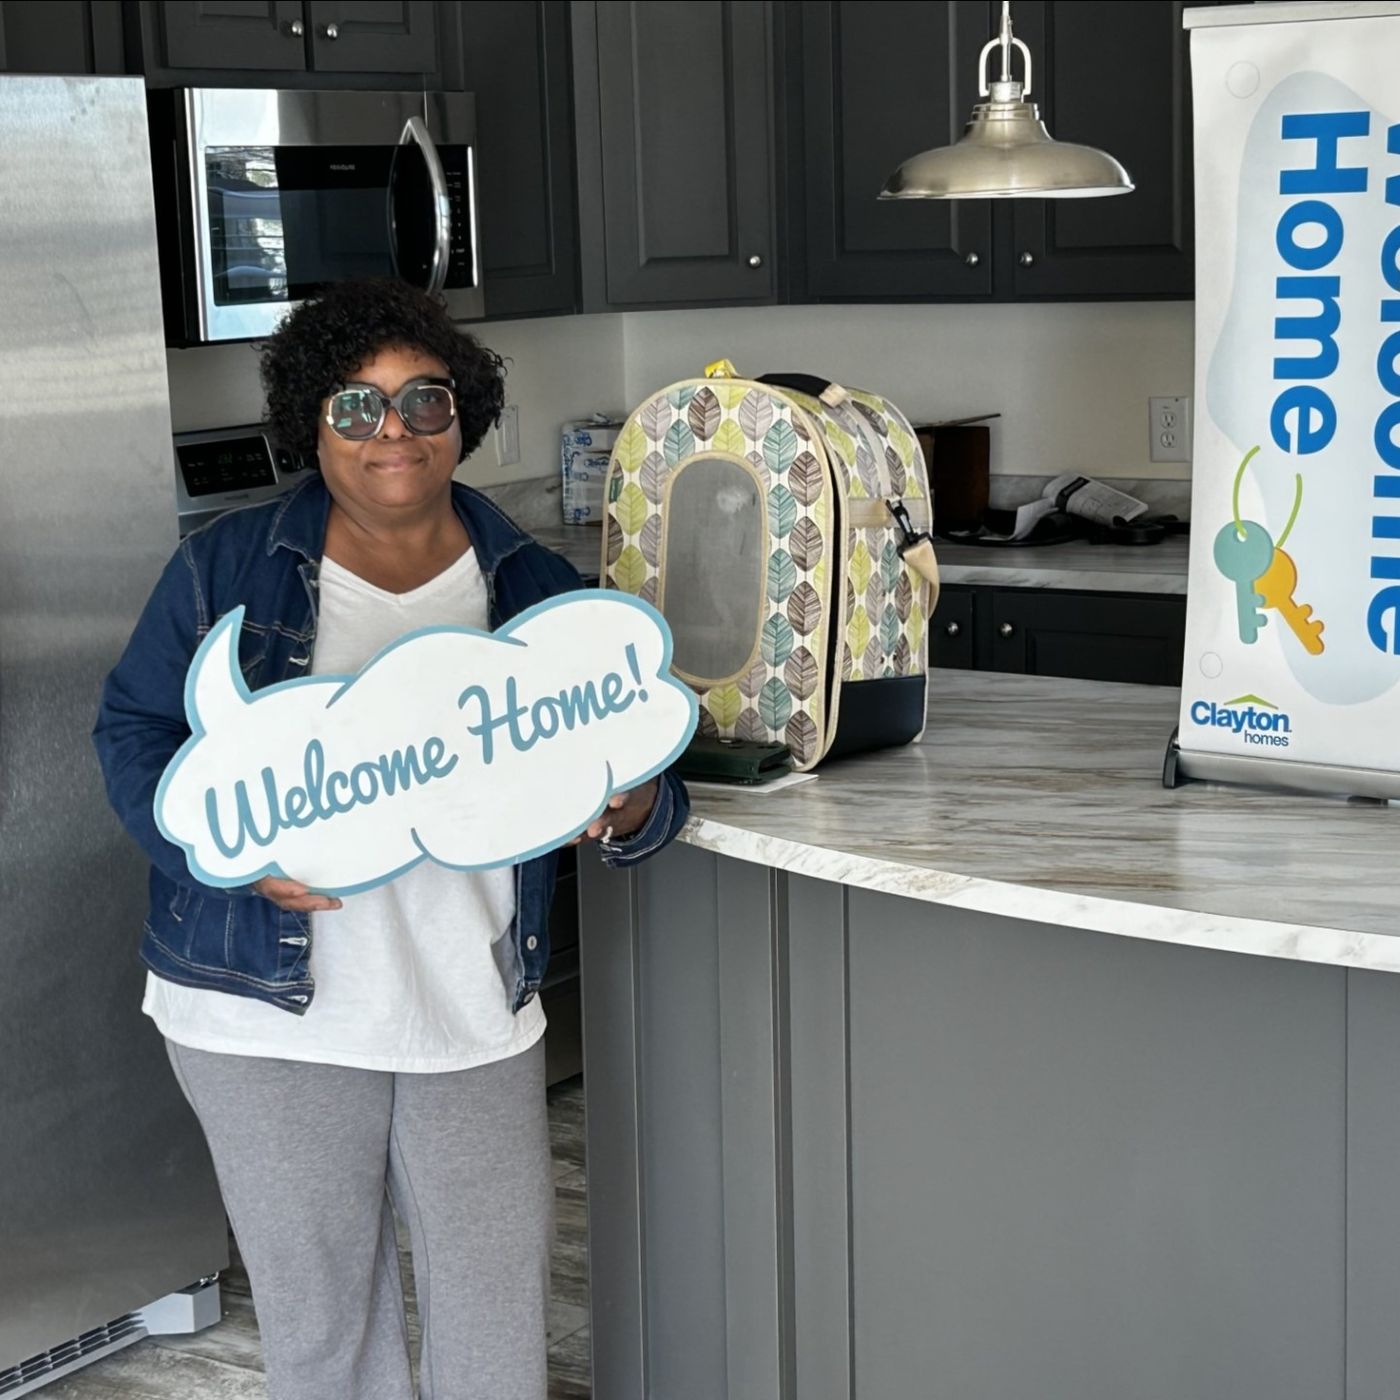 Rosa G. welcome home image